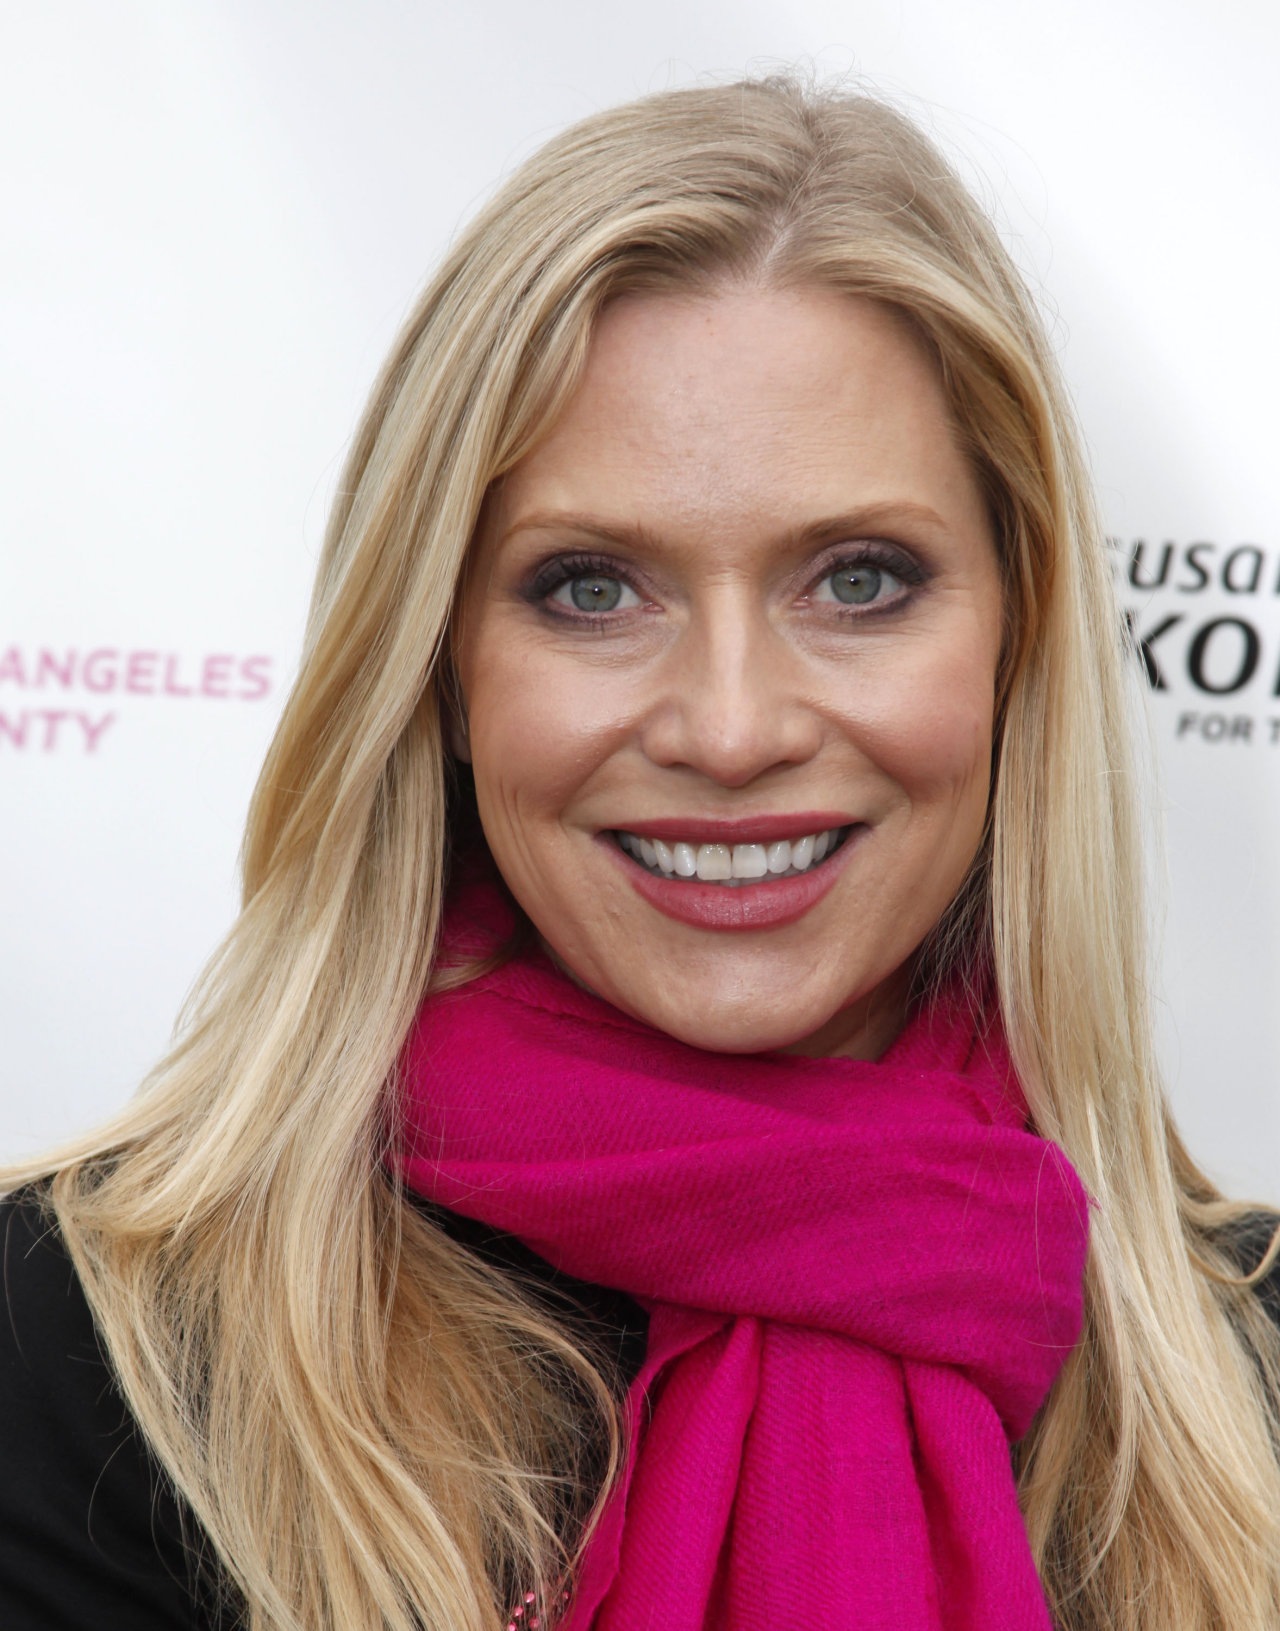 Emily Procter leaked wallpapers